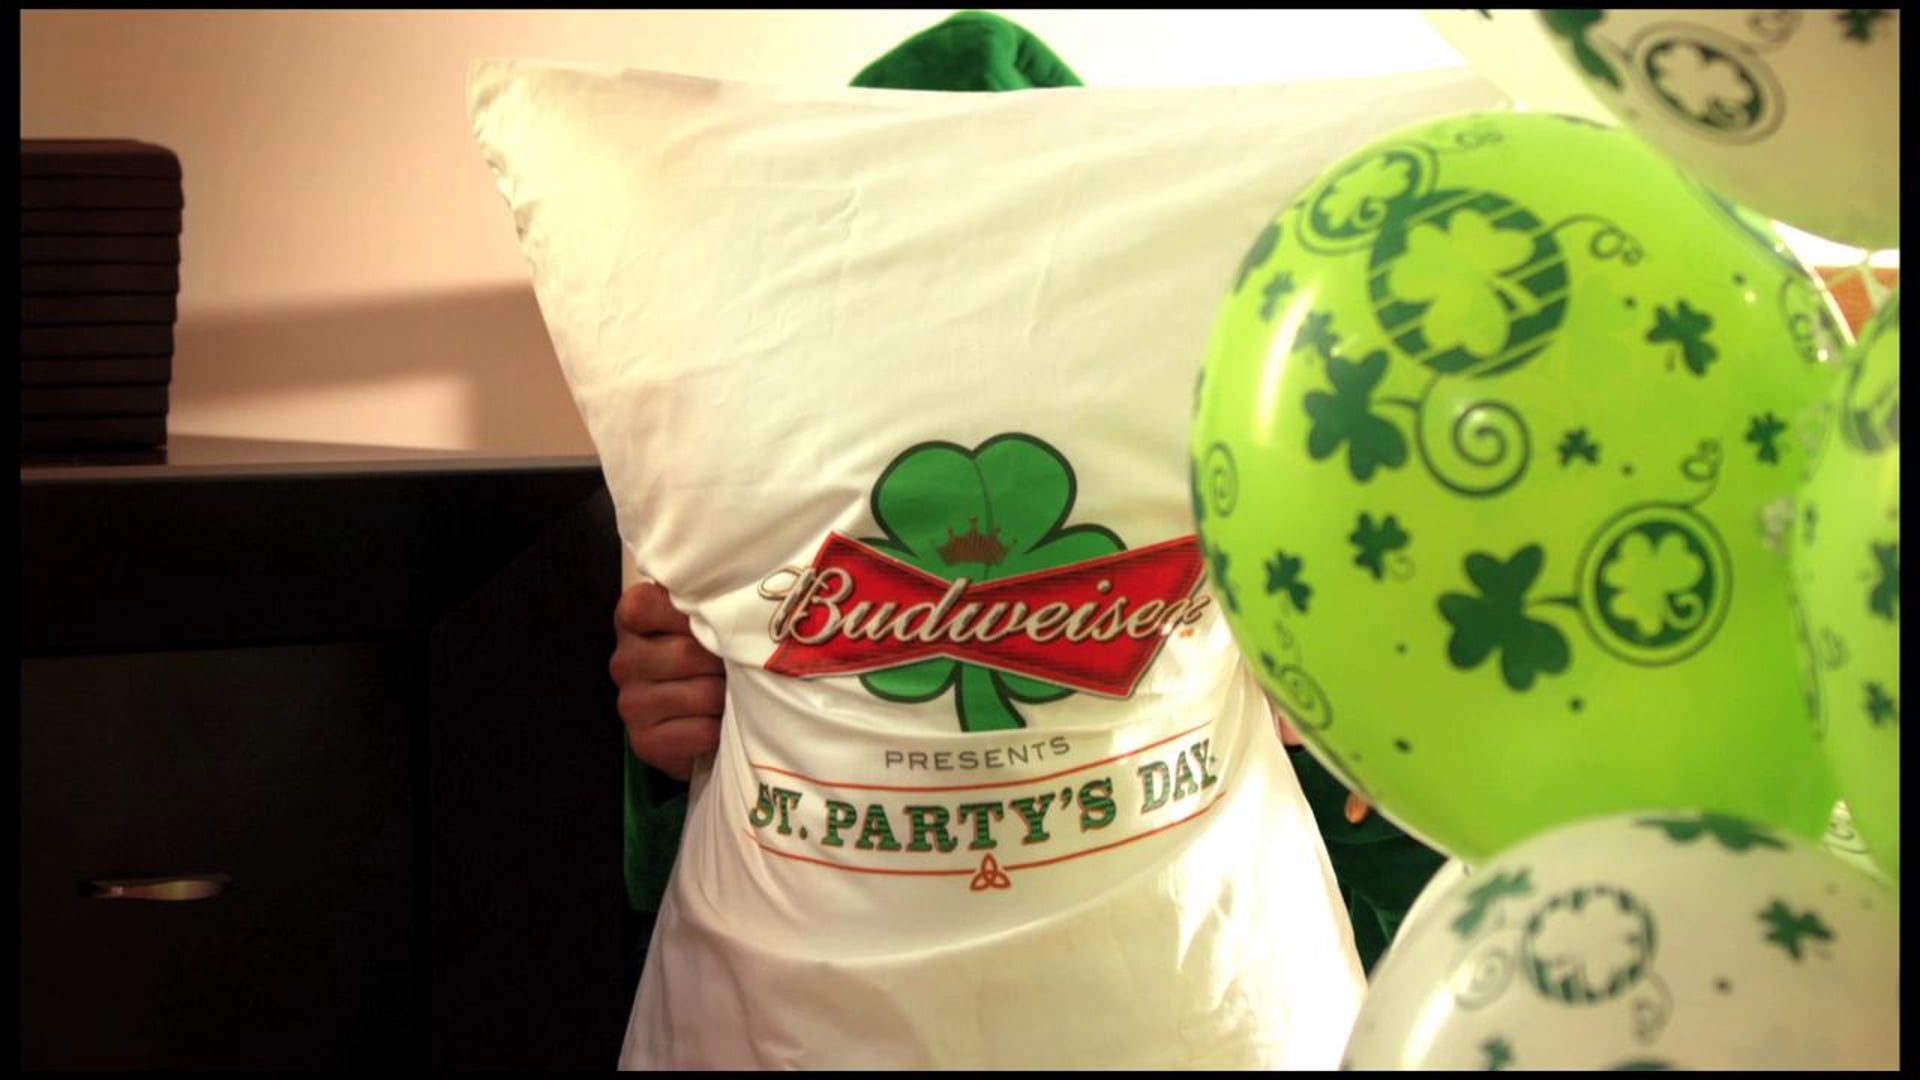 Budweiser - St. Party's Day Commercial